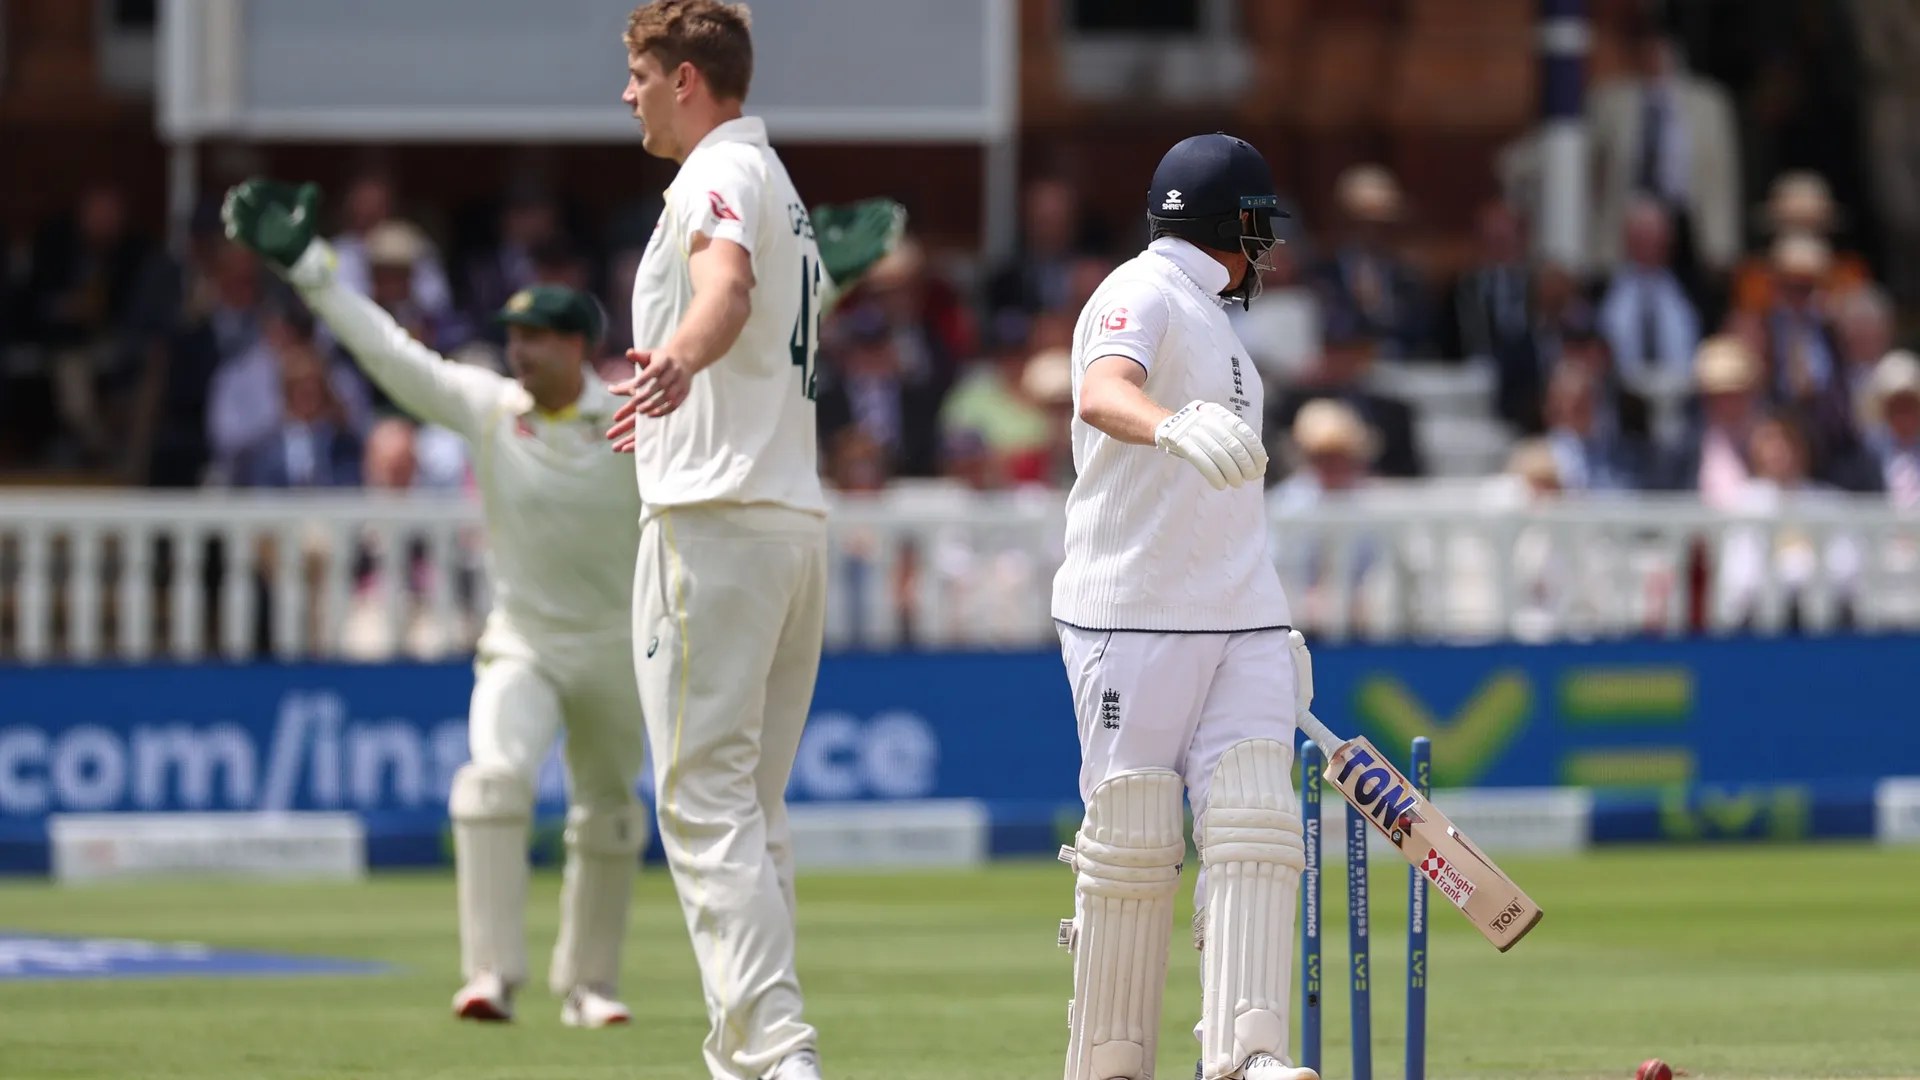 Jonny Bairstow stumped, Lords, Ashes Test